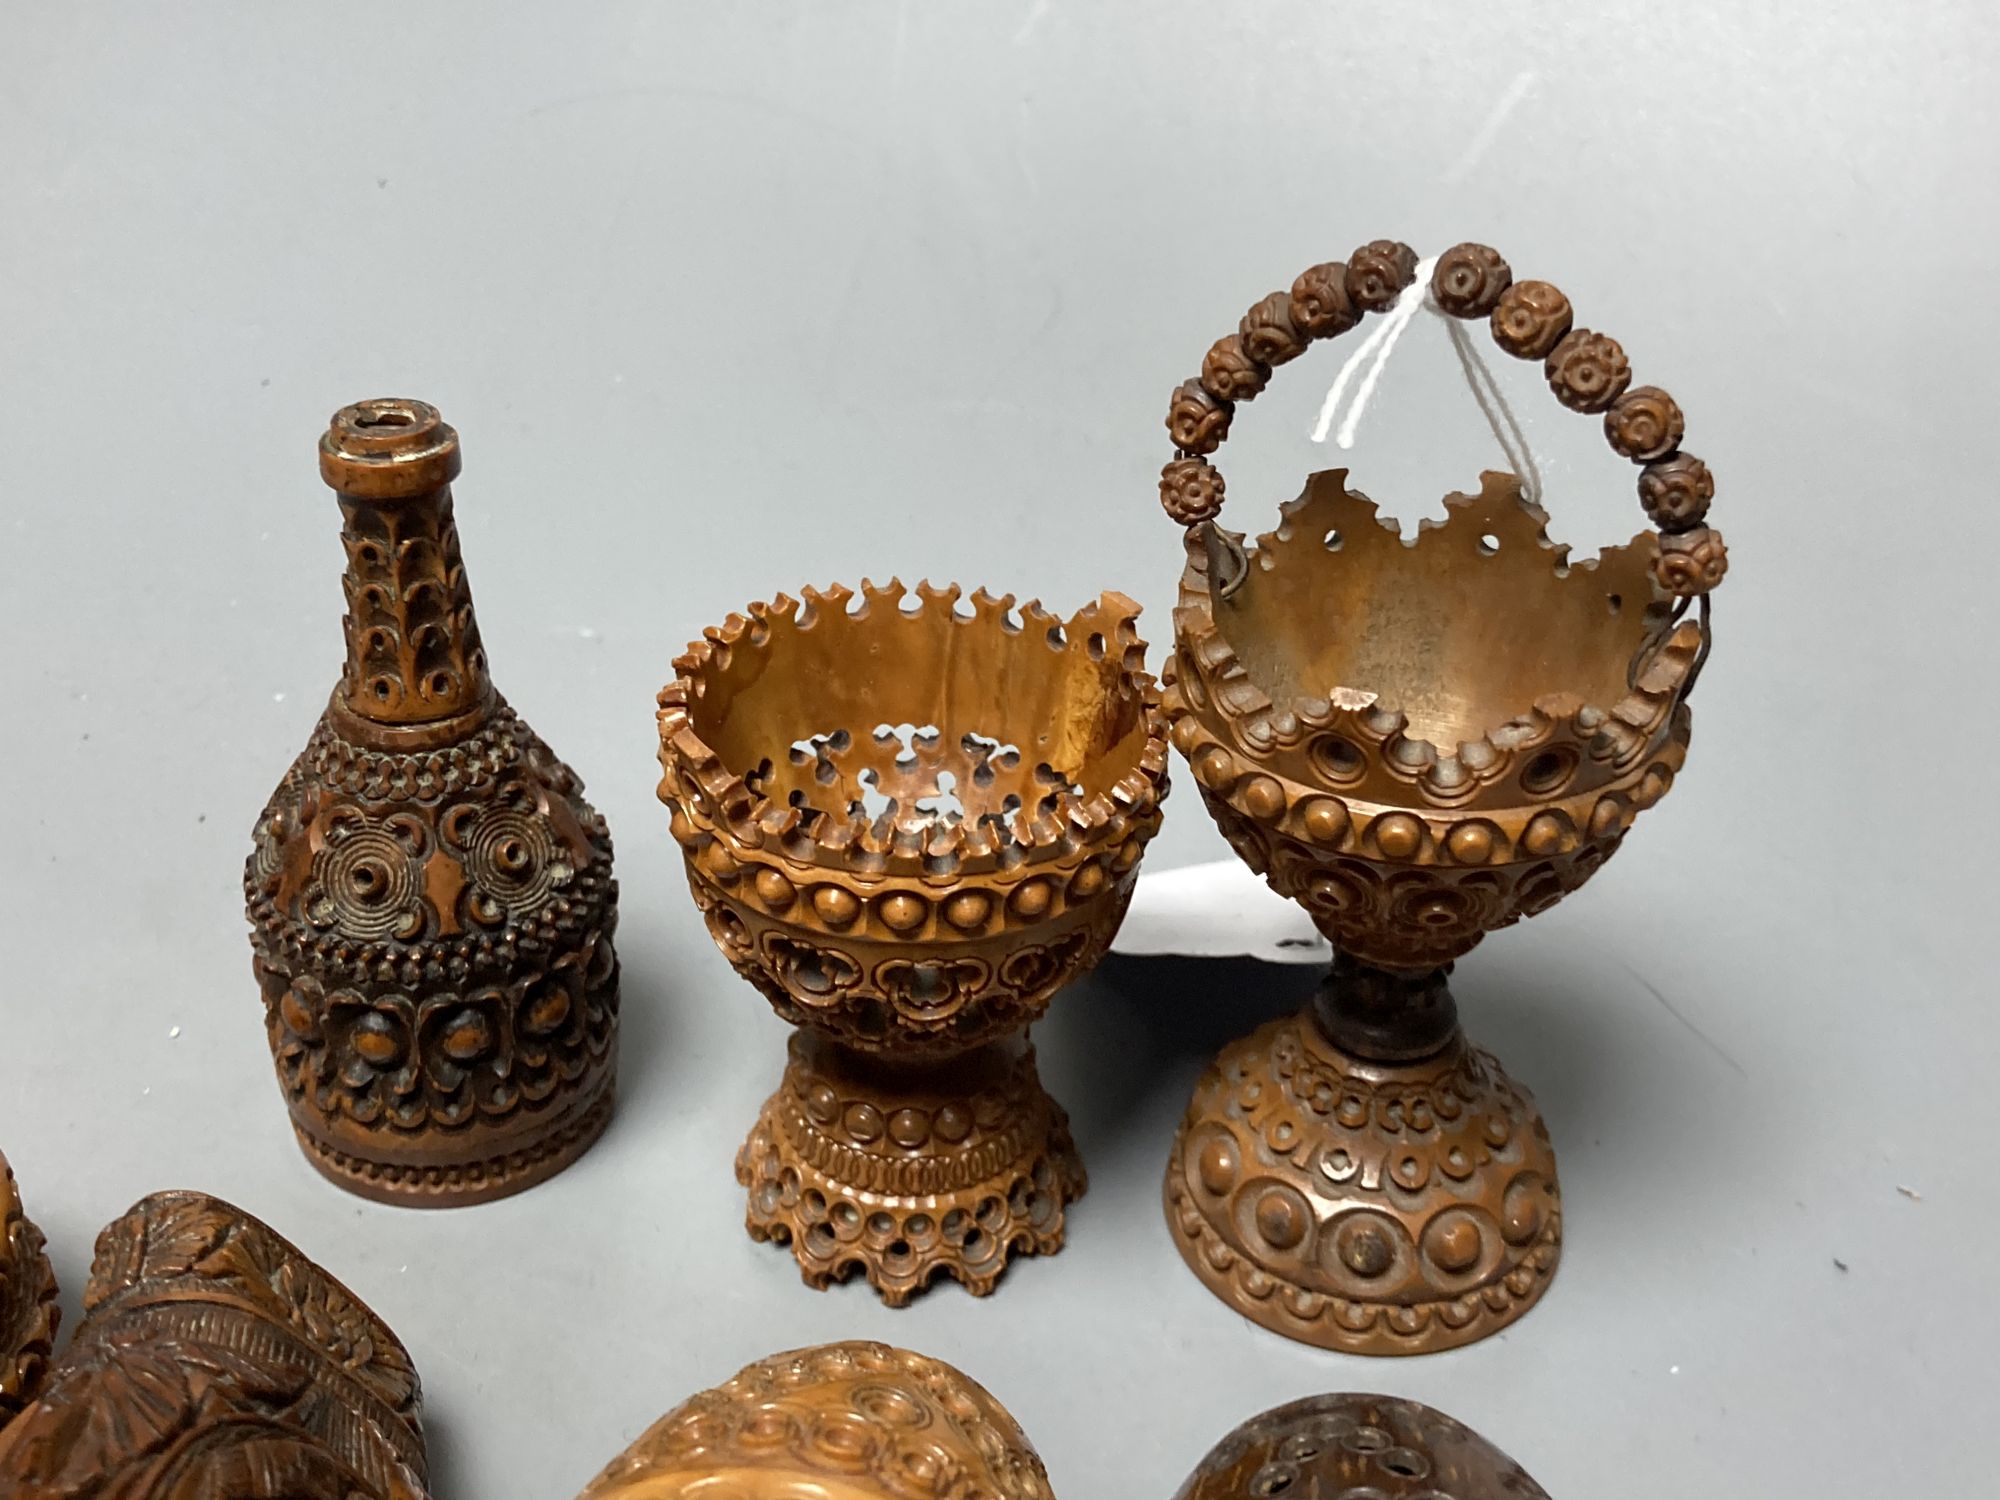 A quantity of coquilla nut carvings